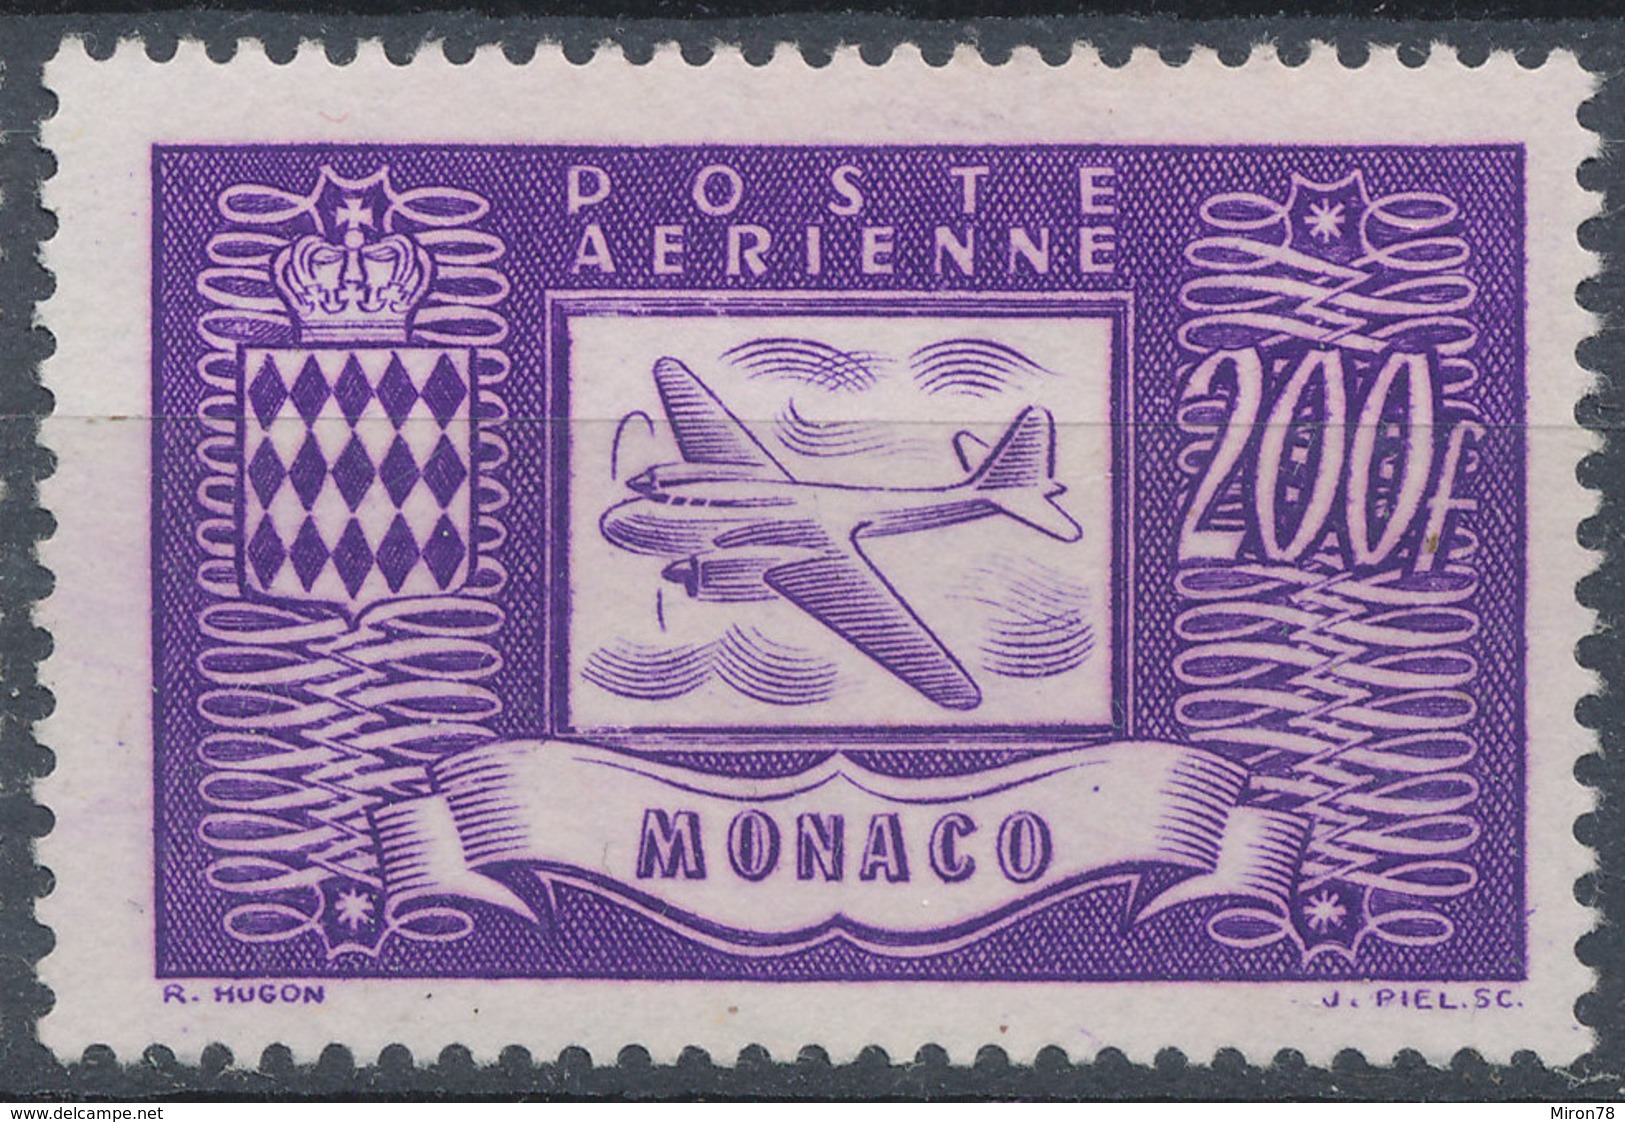 Stamp Monako Airmail 1946 200fr MNG - Airmail